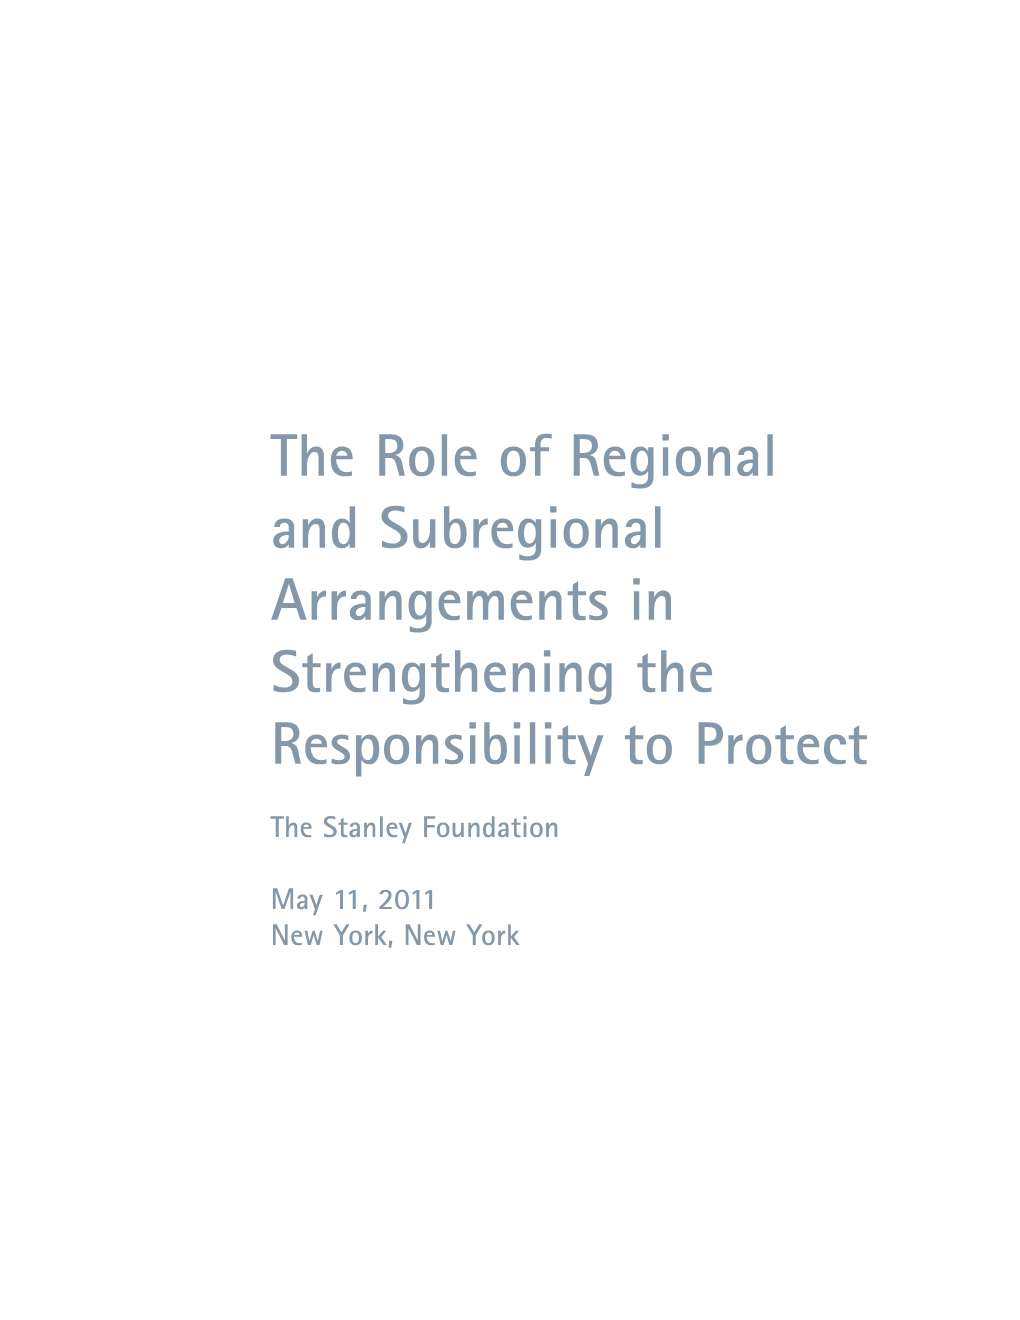 The Role of Regional and Subregional Arrangements in Strengthening the Responsibility to Protect